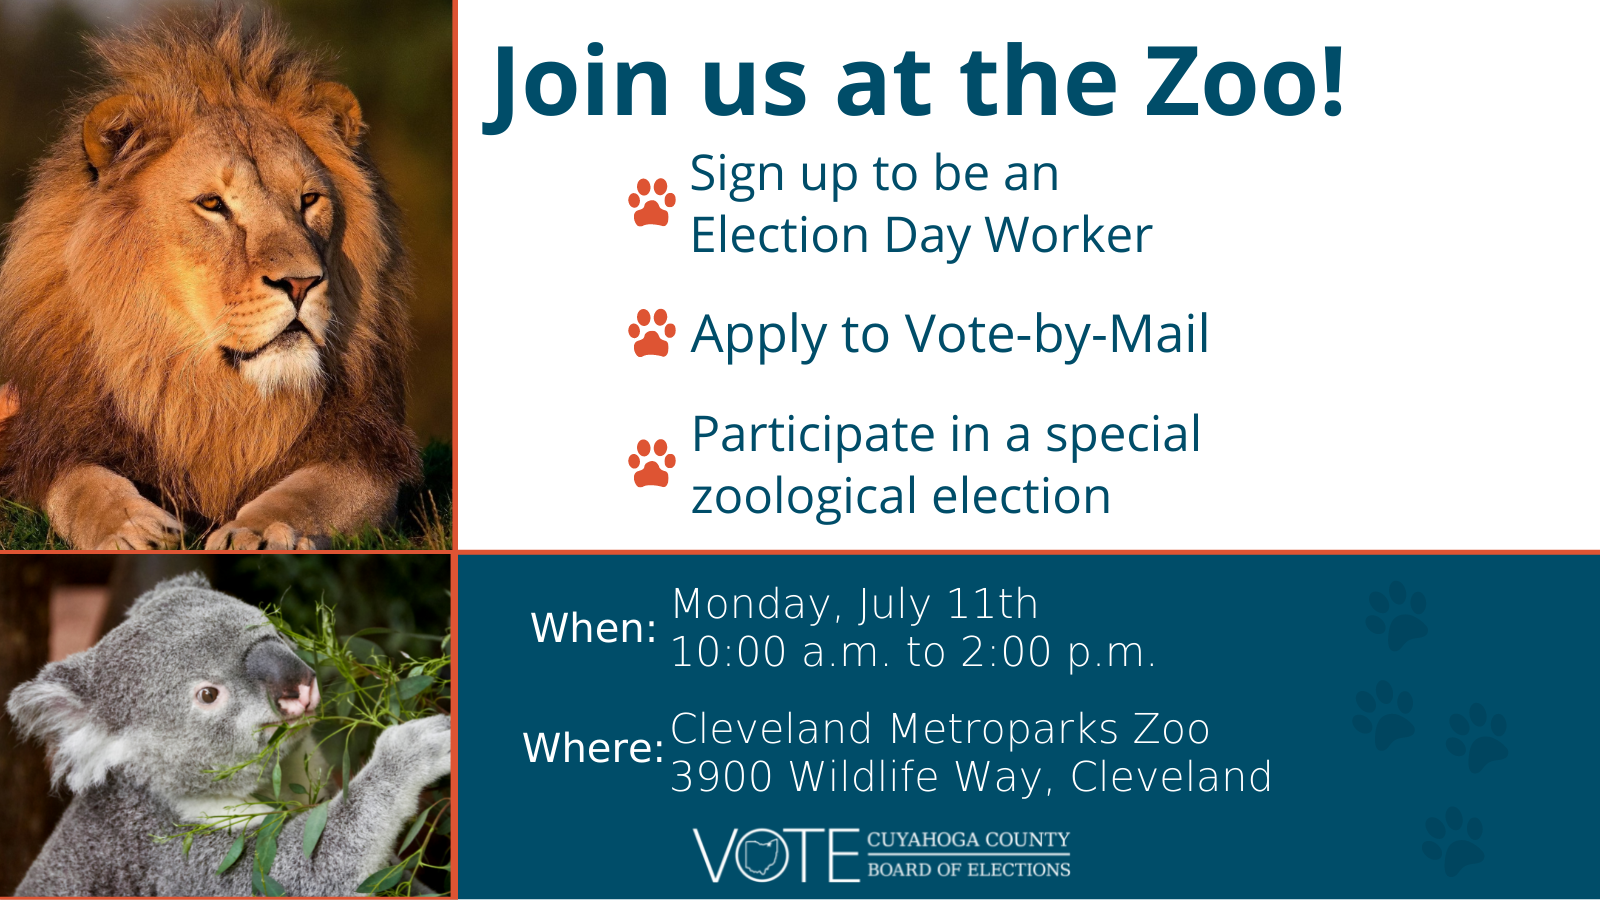 Join us at the zoo!